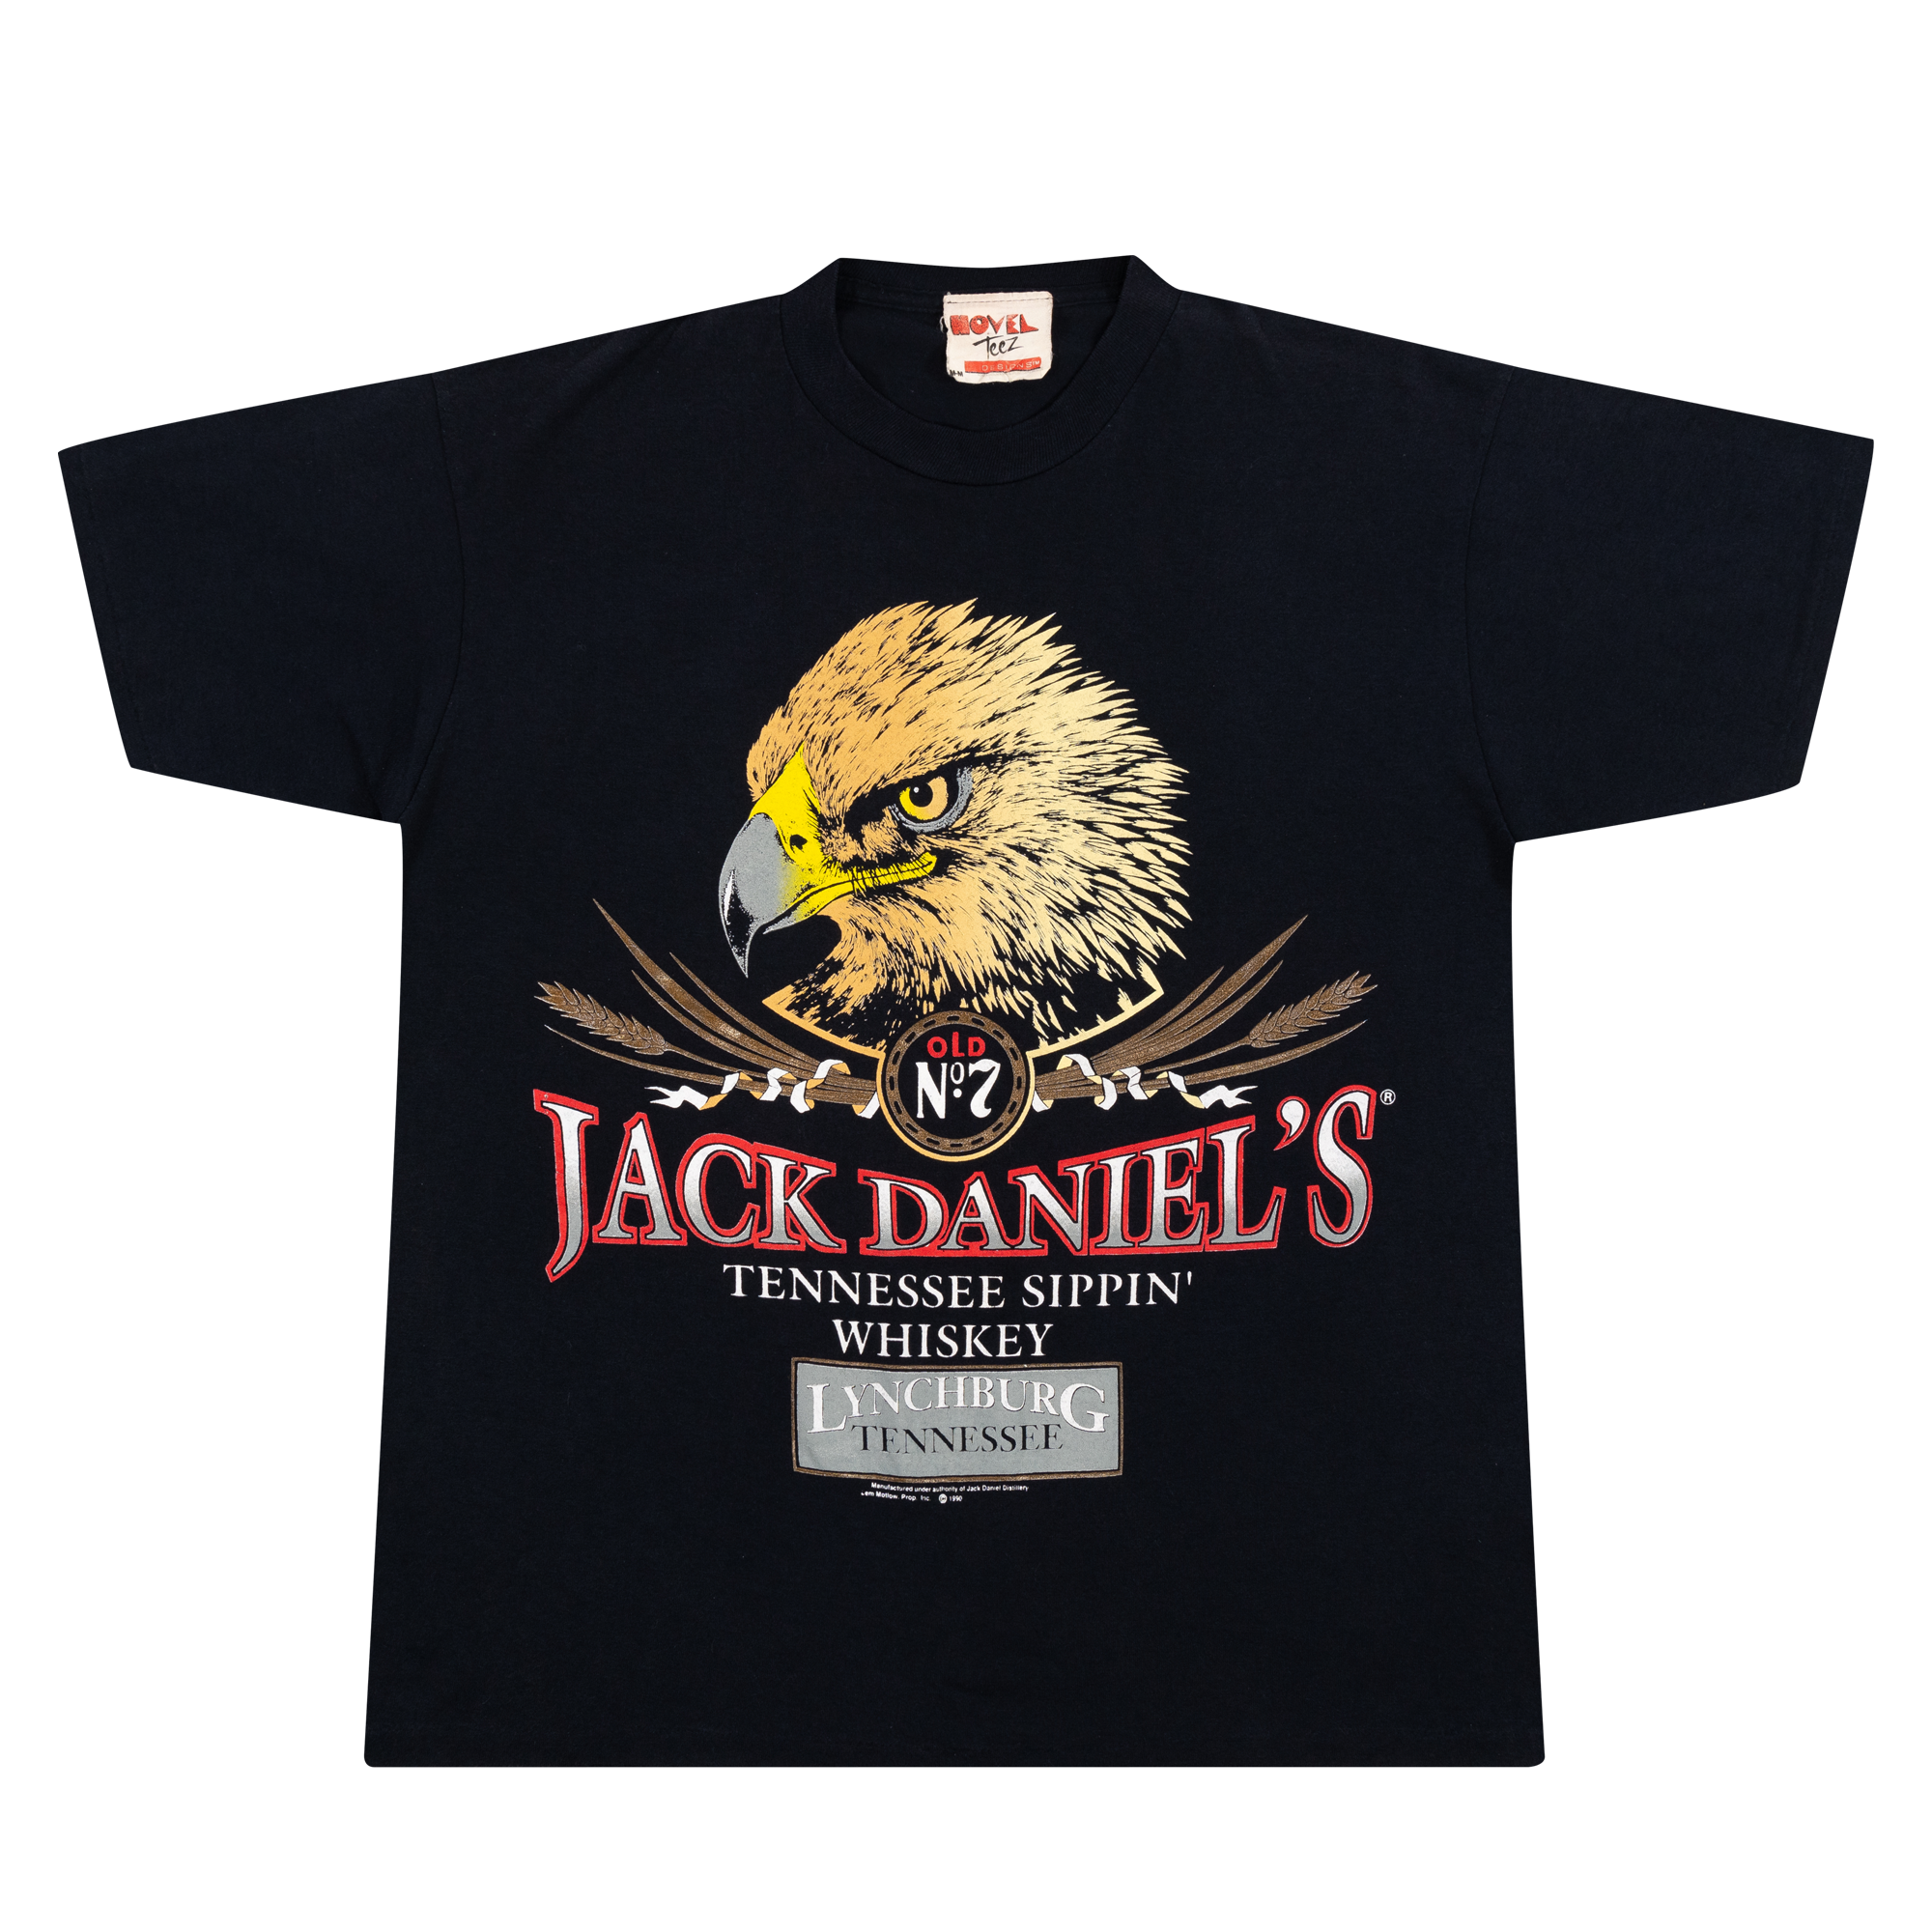 Jack Daniels Tennessee Sippin' Whiskey 1990 Tee Black-PLUS